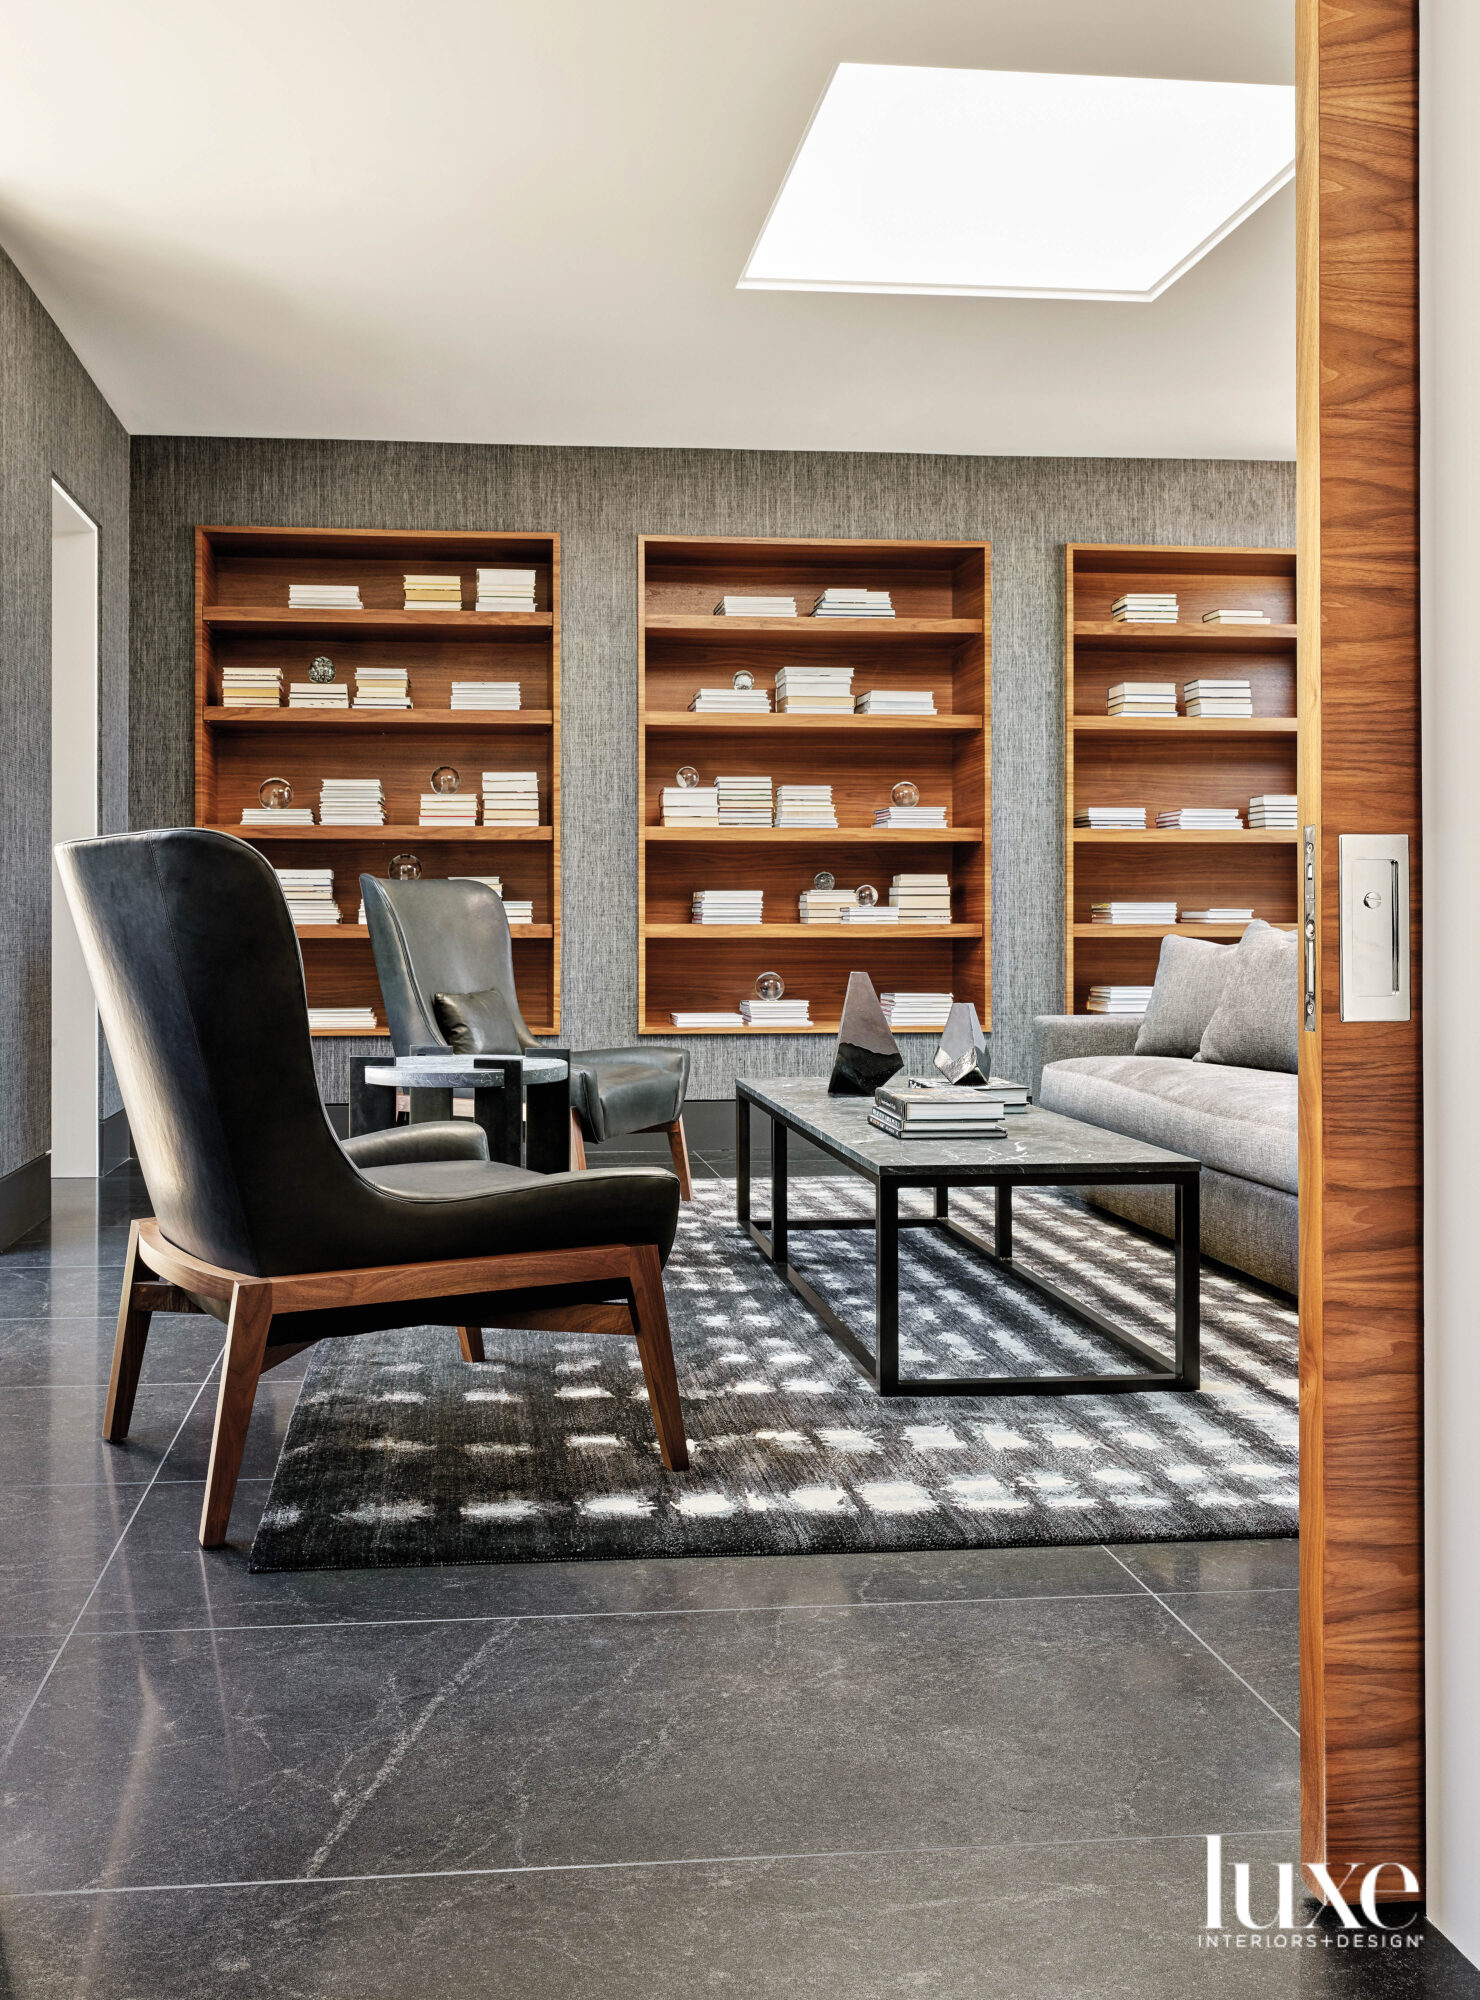 An office with black leather chairs, a gray couch and rows of wood open shelving.